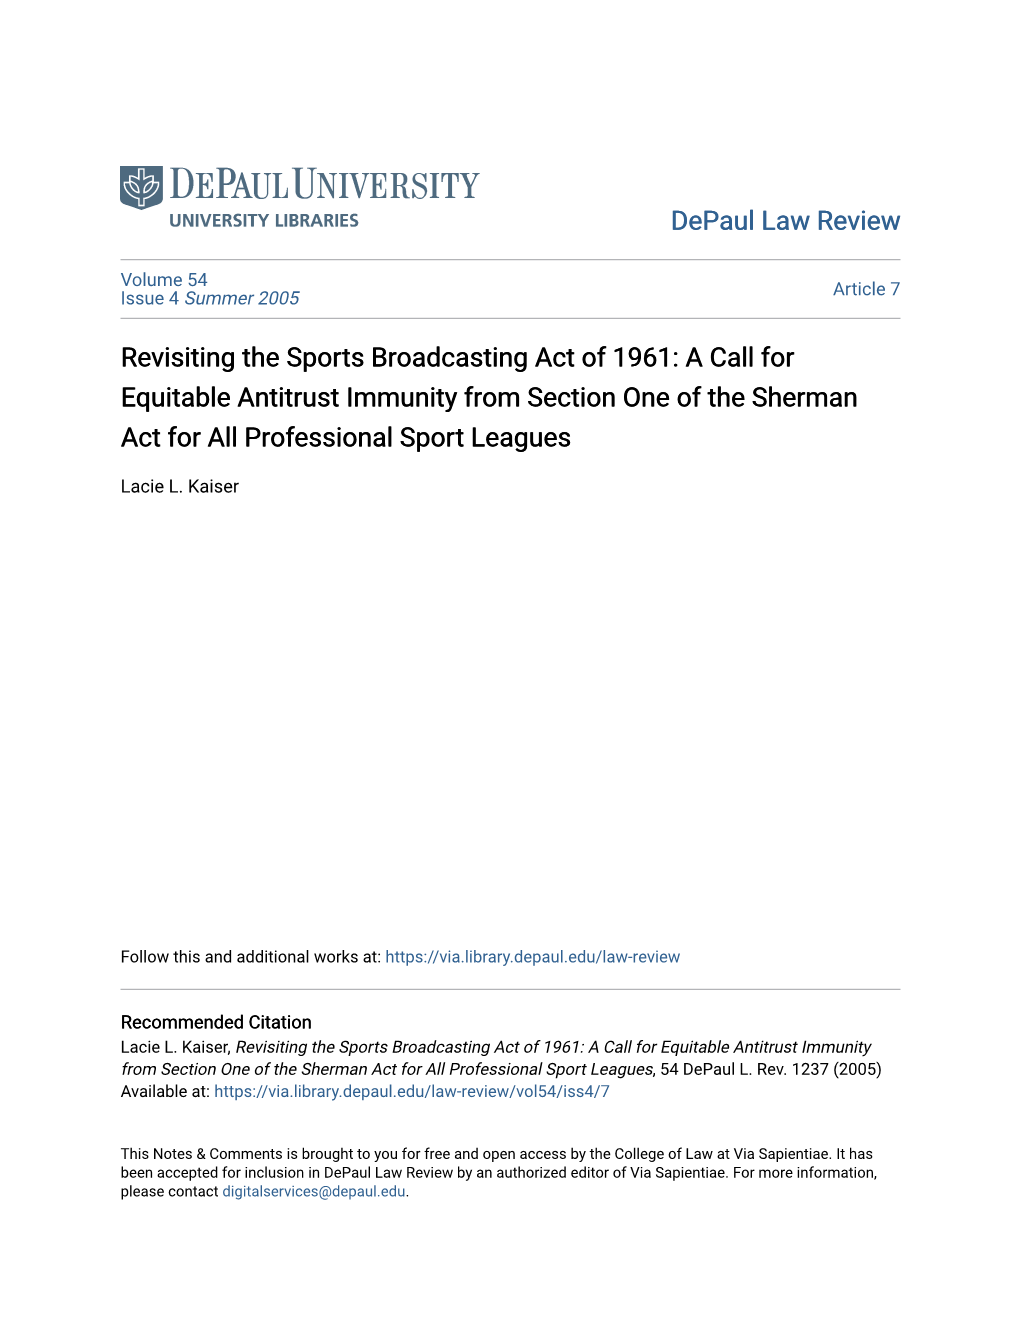 Revisiting the Sports Broadcasting Act of 1961: a Call for Equitable Antitrust Immunity from Section One of the Sherman Act for All Professional Sport Leagues